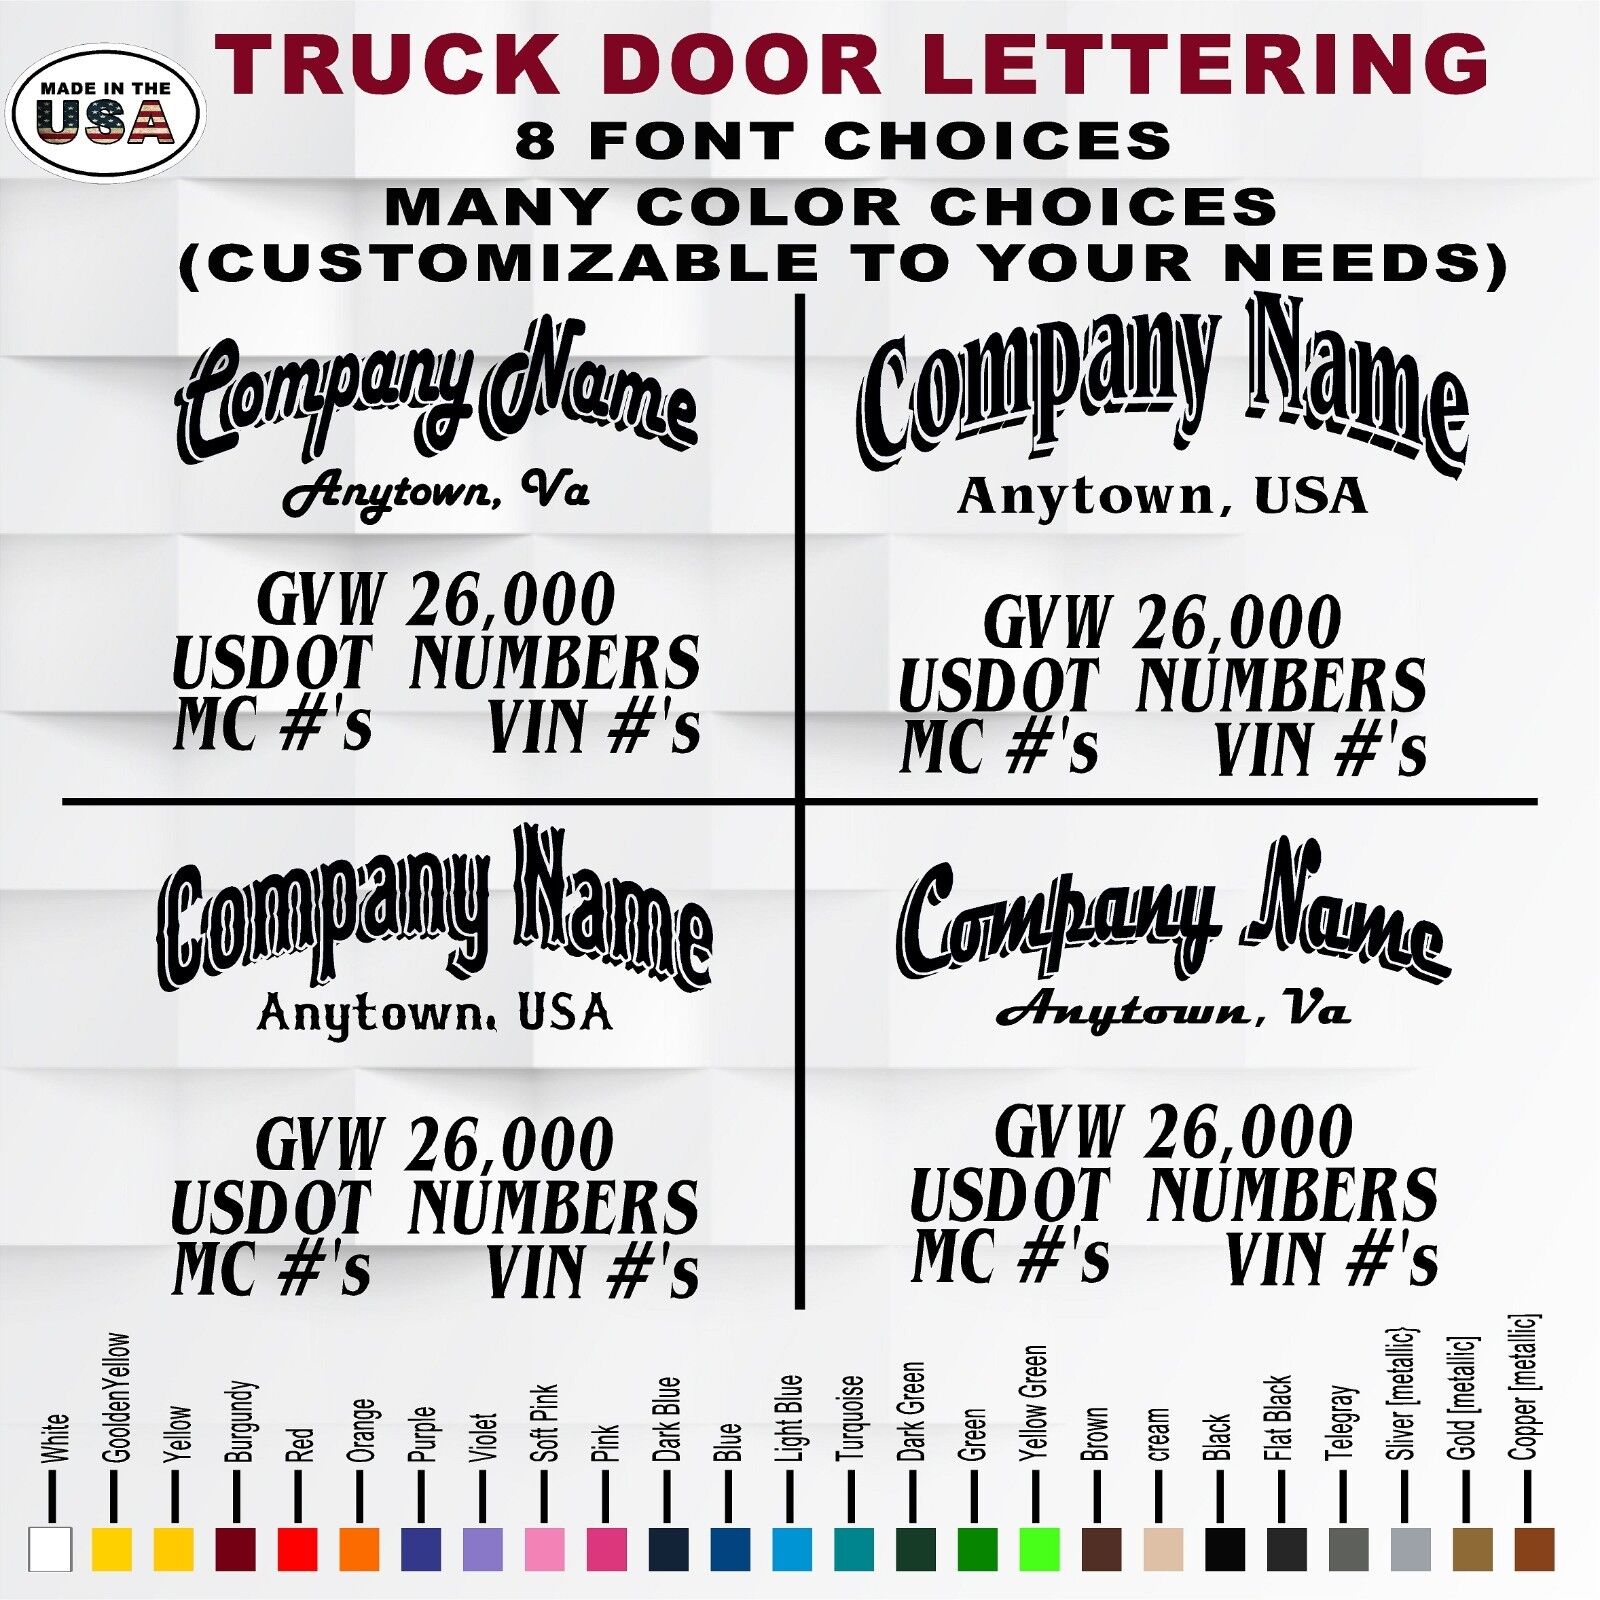 Business Truck Lettering | Business Name, Town, State, Phone Number, USDOT